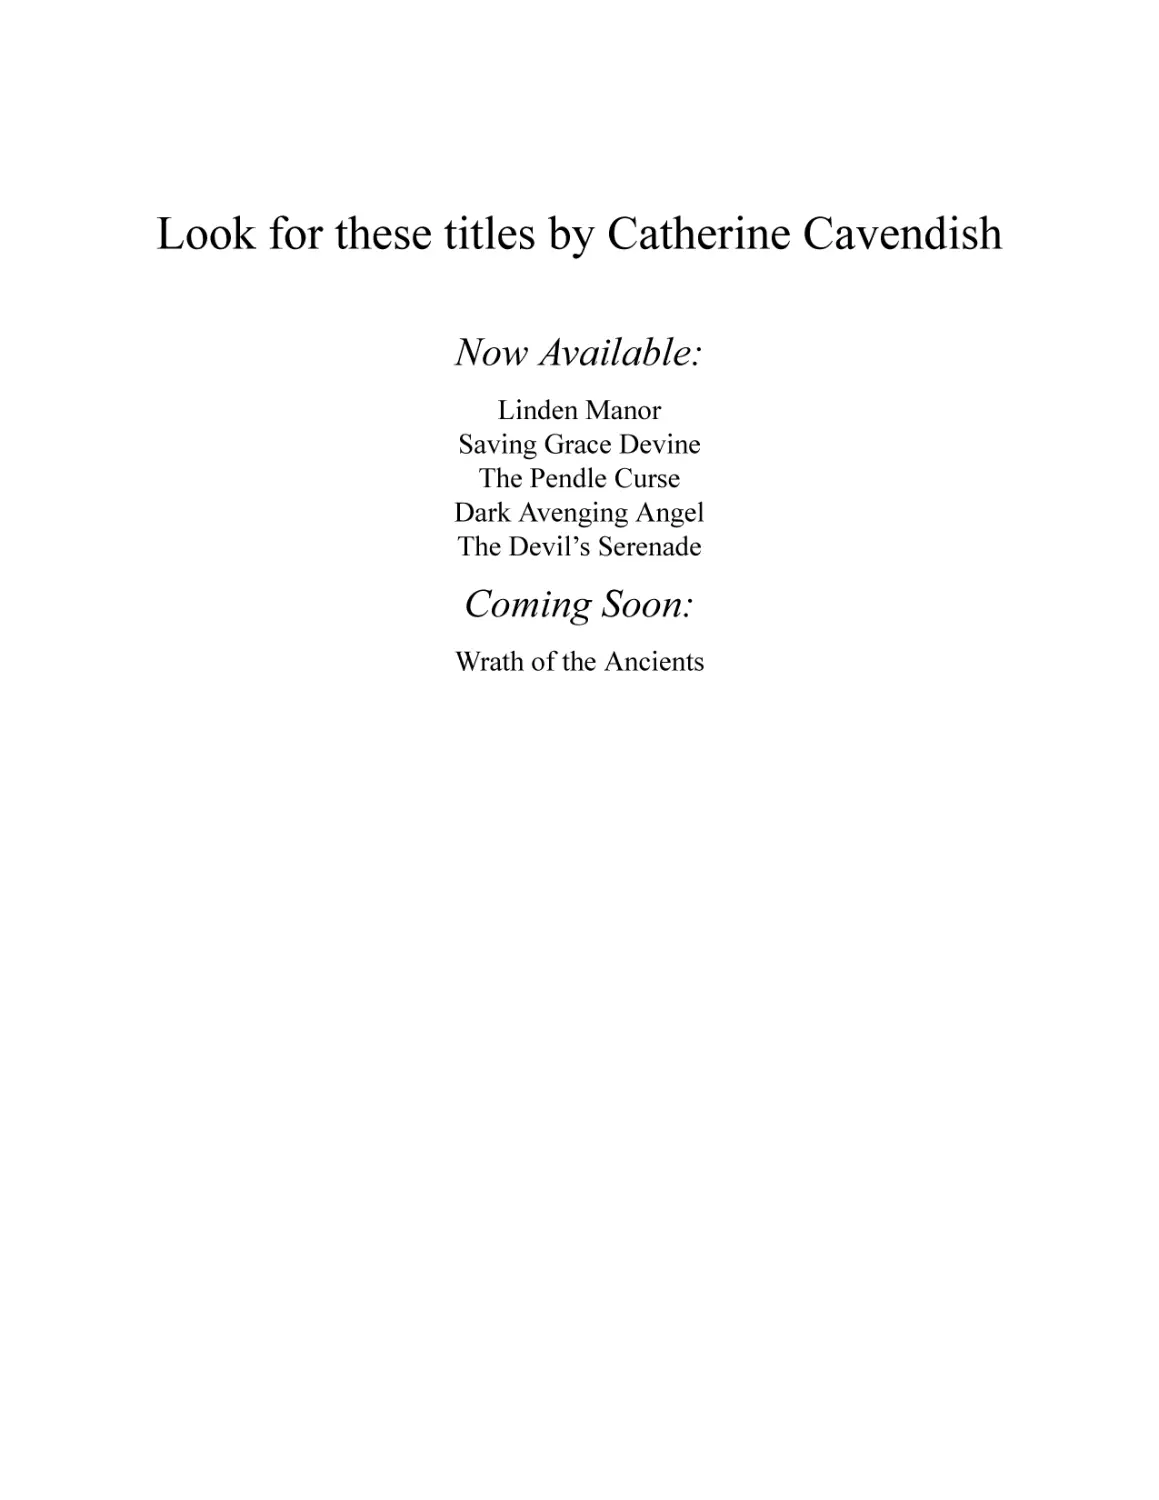 Look for these titles by Catherine Cavendish